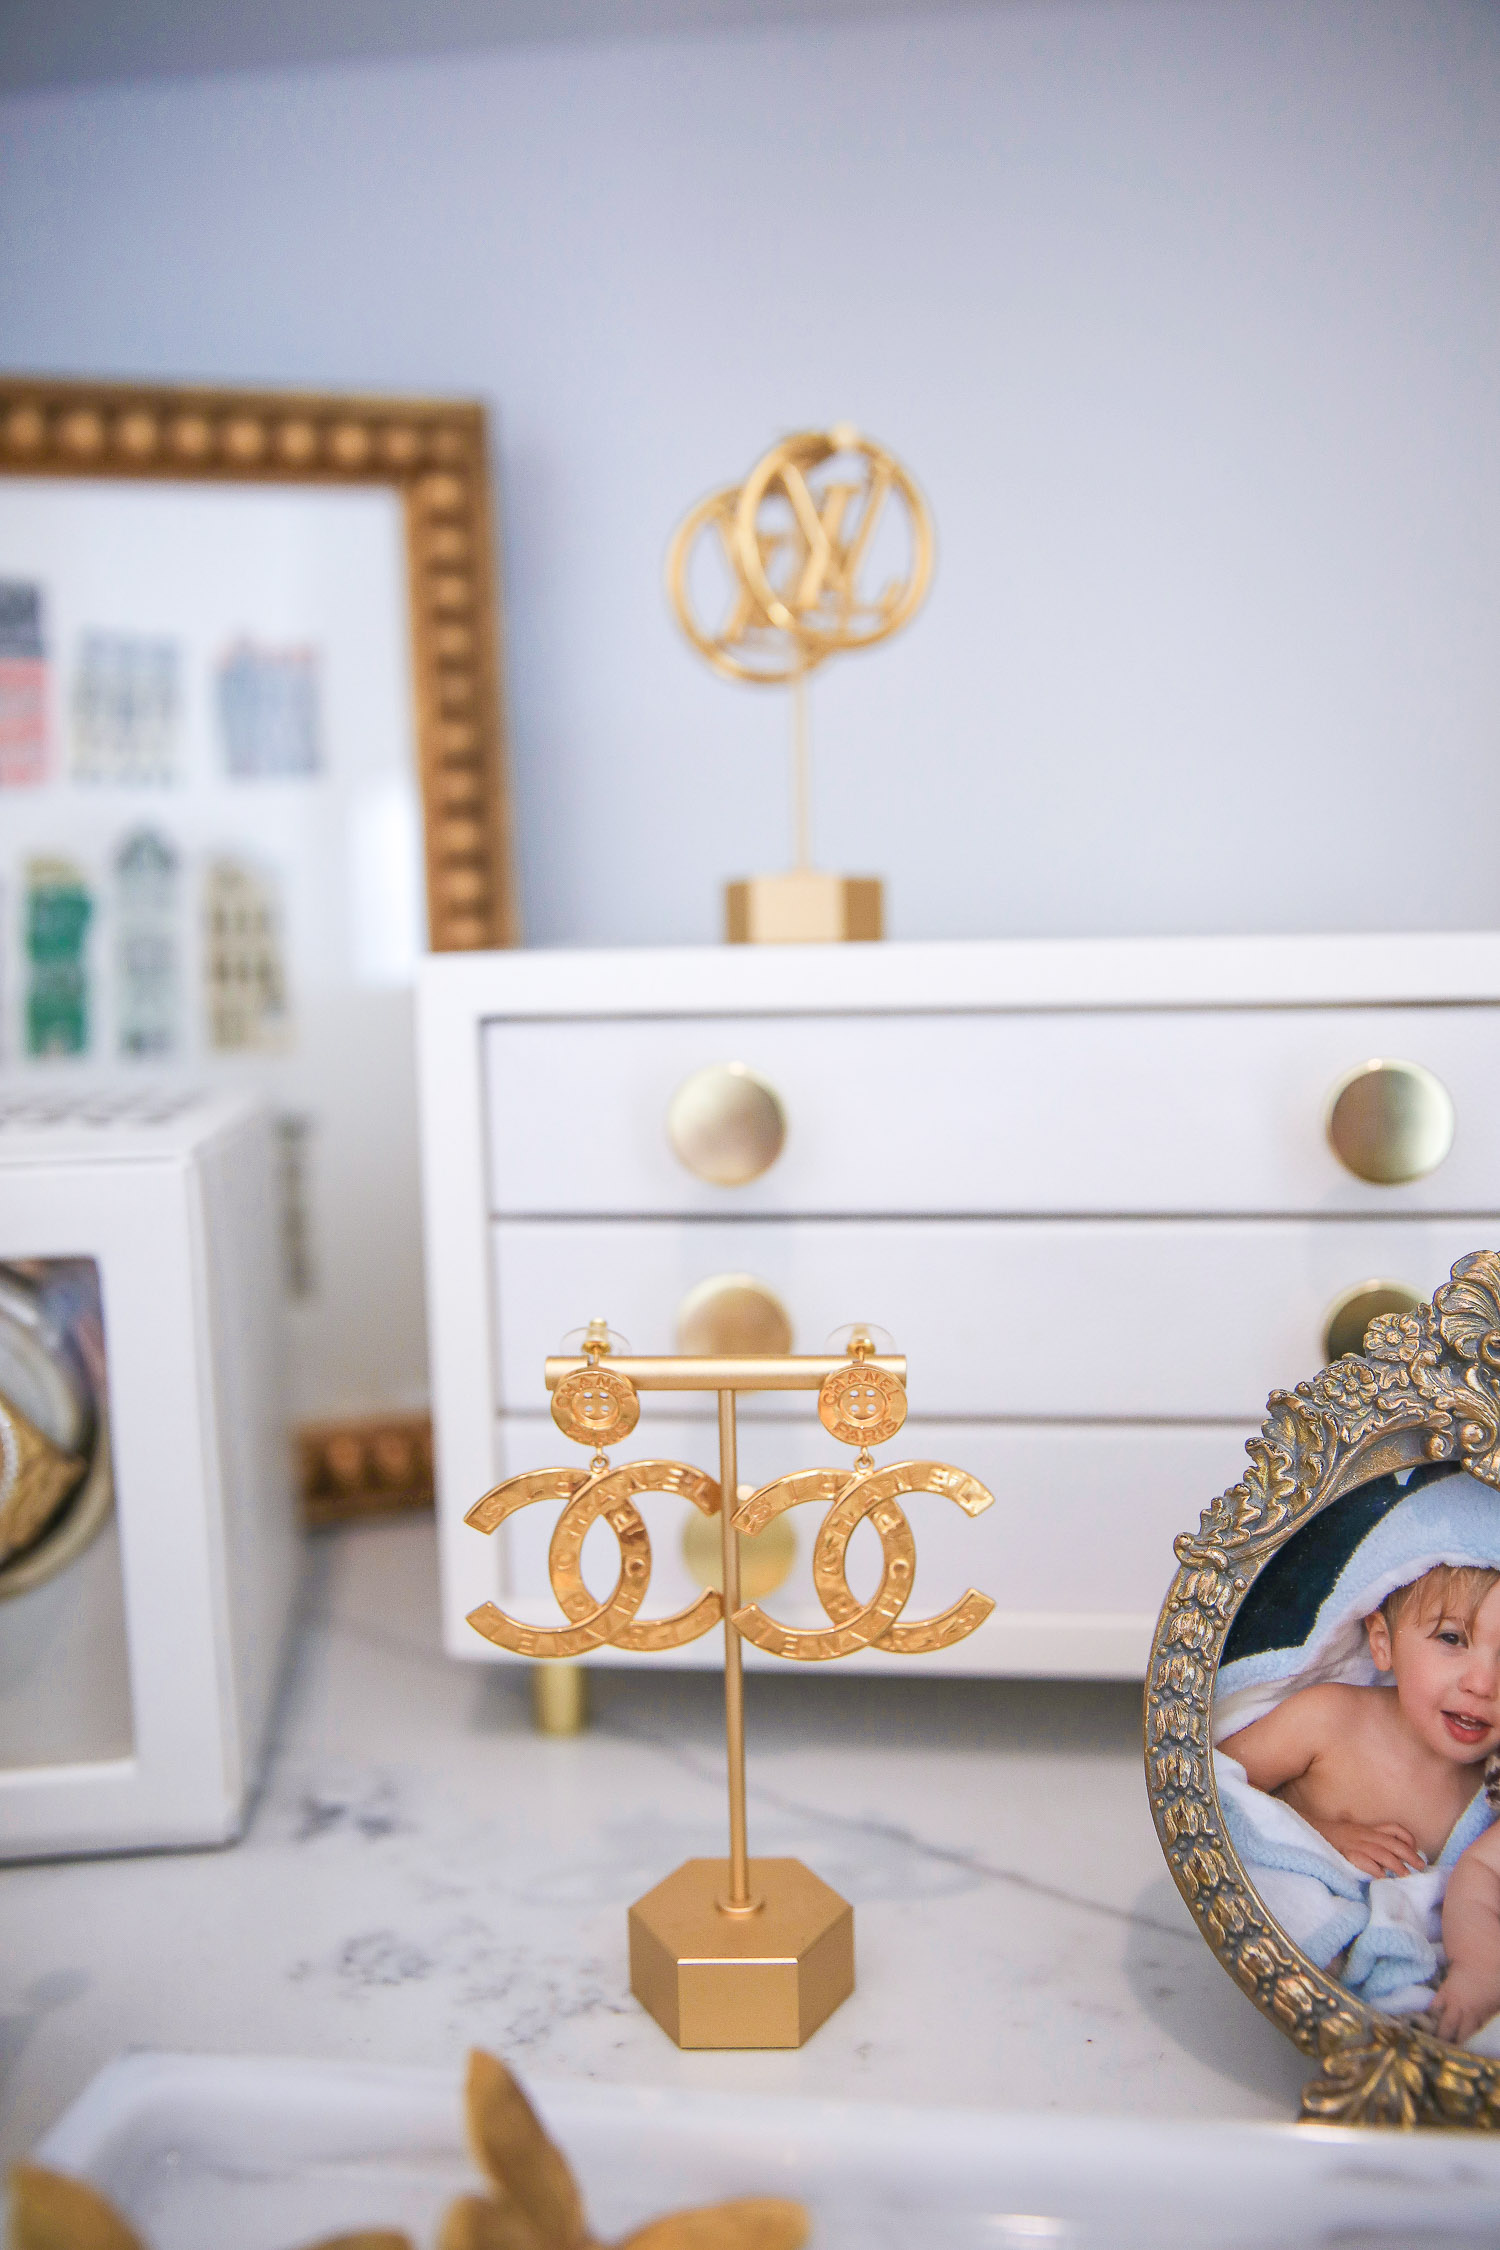 Amazon must haves jewelry holder, gold earring stands amazon, Emily Gemma amazon store, Chanel gold button earrings spring 2021, designer jewelry collection |Amazon Must Haves by popular US life and style blog, The Sweetest Thing: image of gold picture frames, gold jewelry holders, white jewelry box, pink velvet bracelet cushion, Chanel Gold button collection earrings on a gold earring stand, and gold necklace holder on a white marble counter top. 